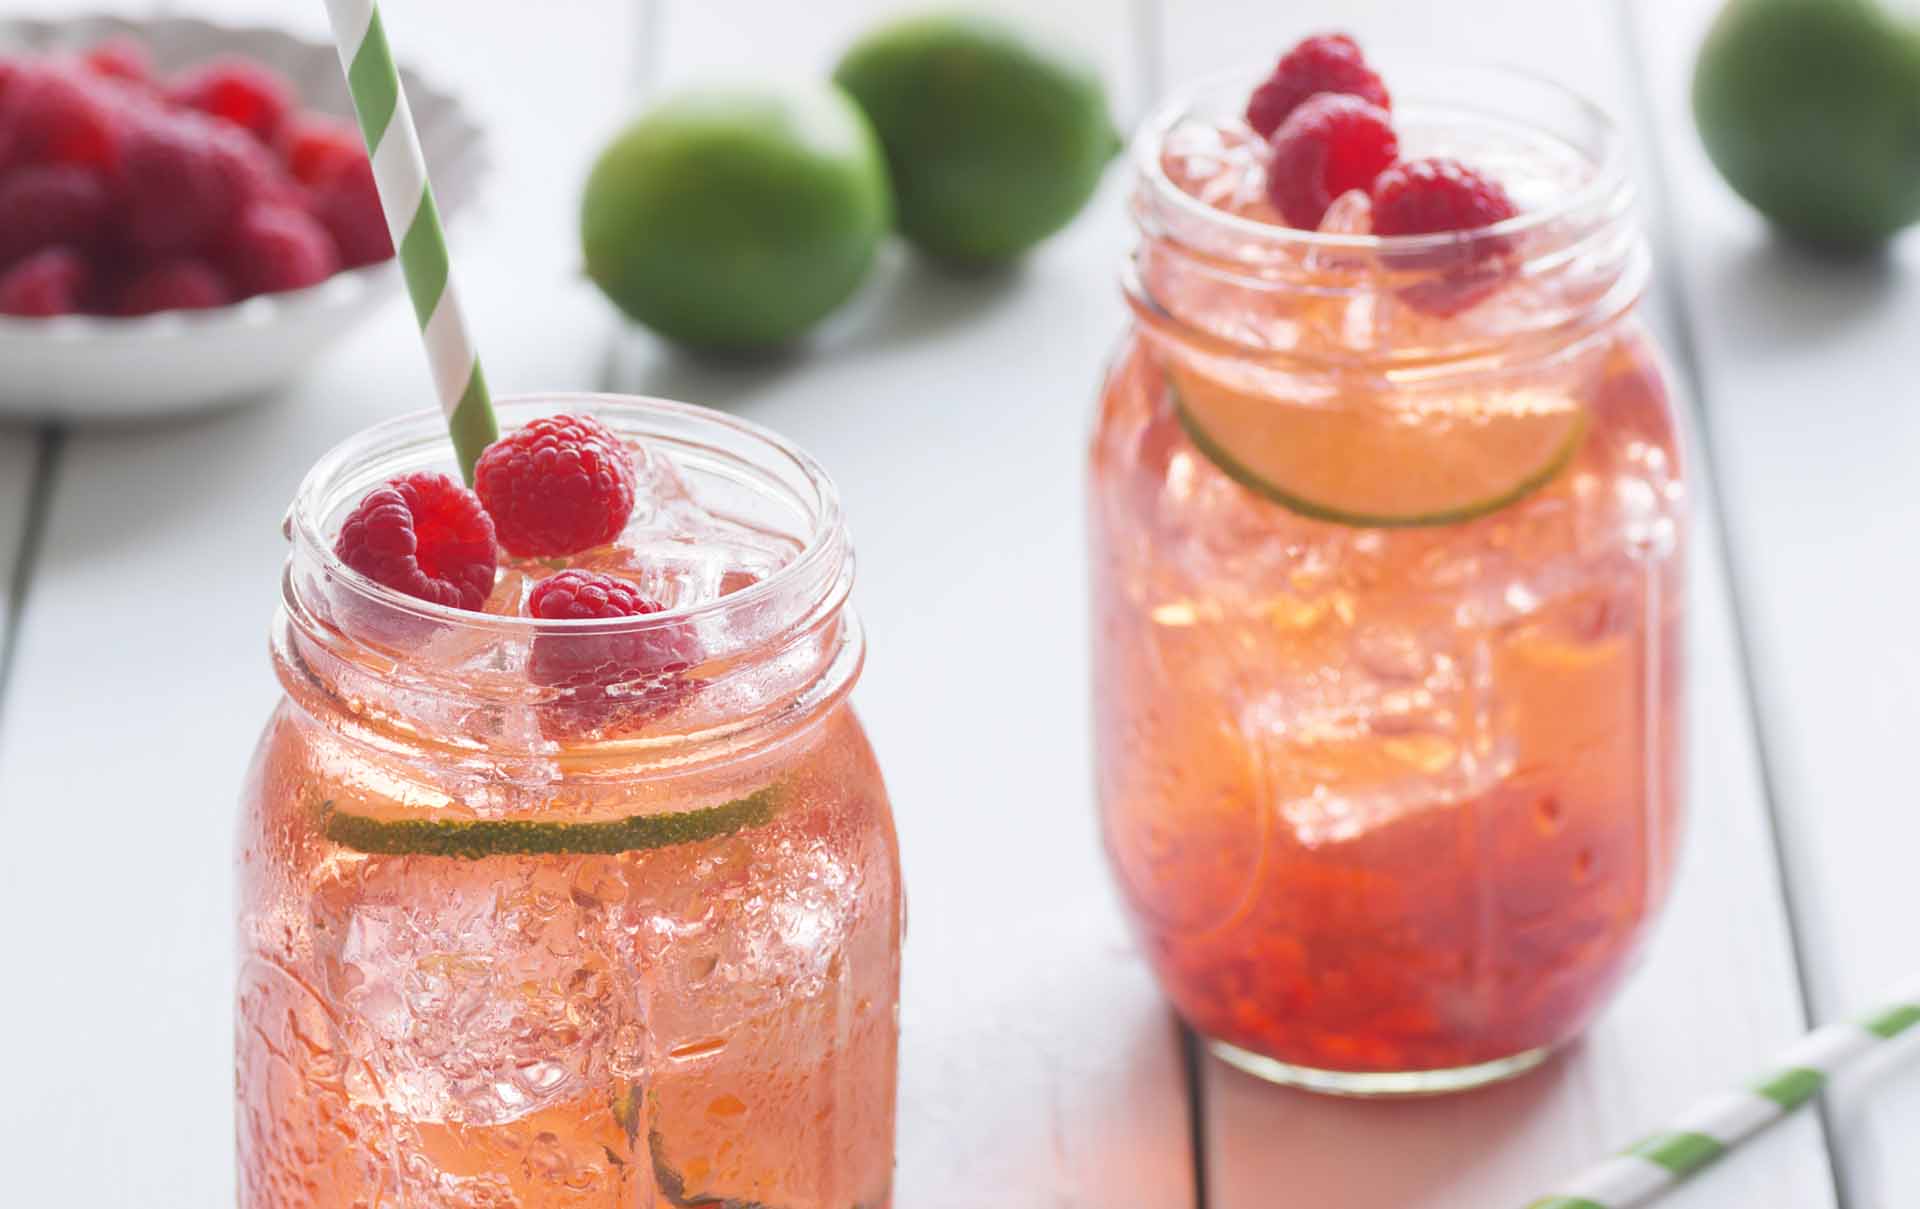 Raspberry lime iced tea in glasses with straws. Ingredients for making tea - including fresh limes and berries in a bowl - are on the white picnic table in the background.